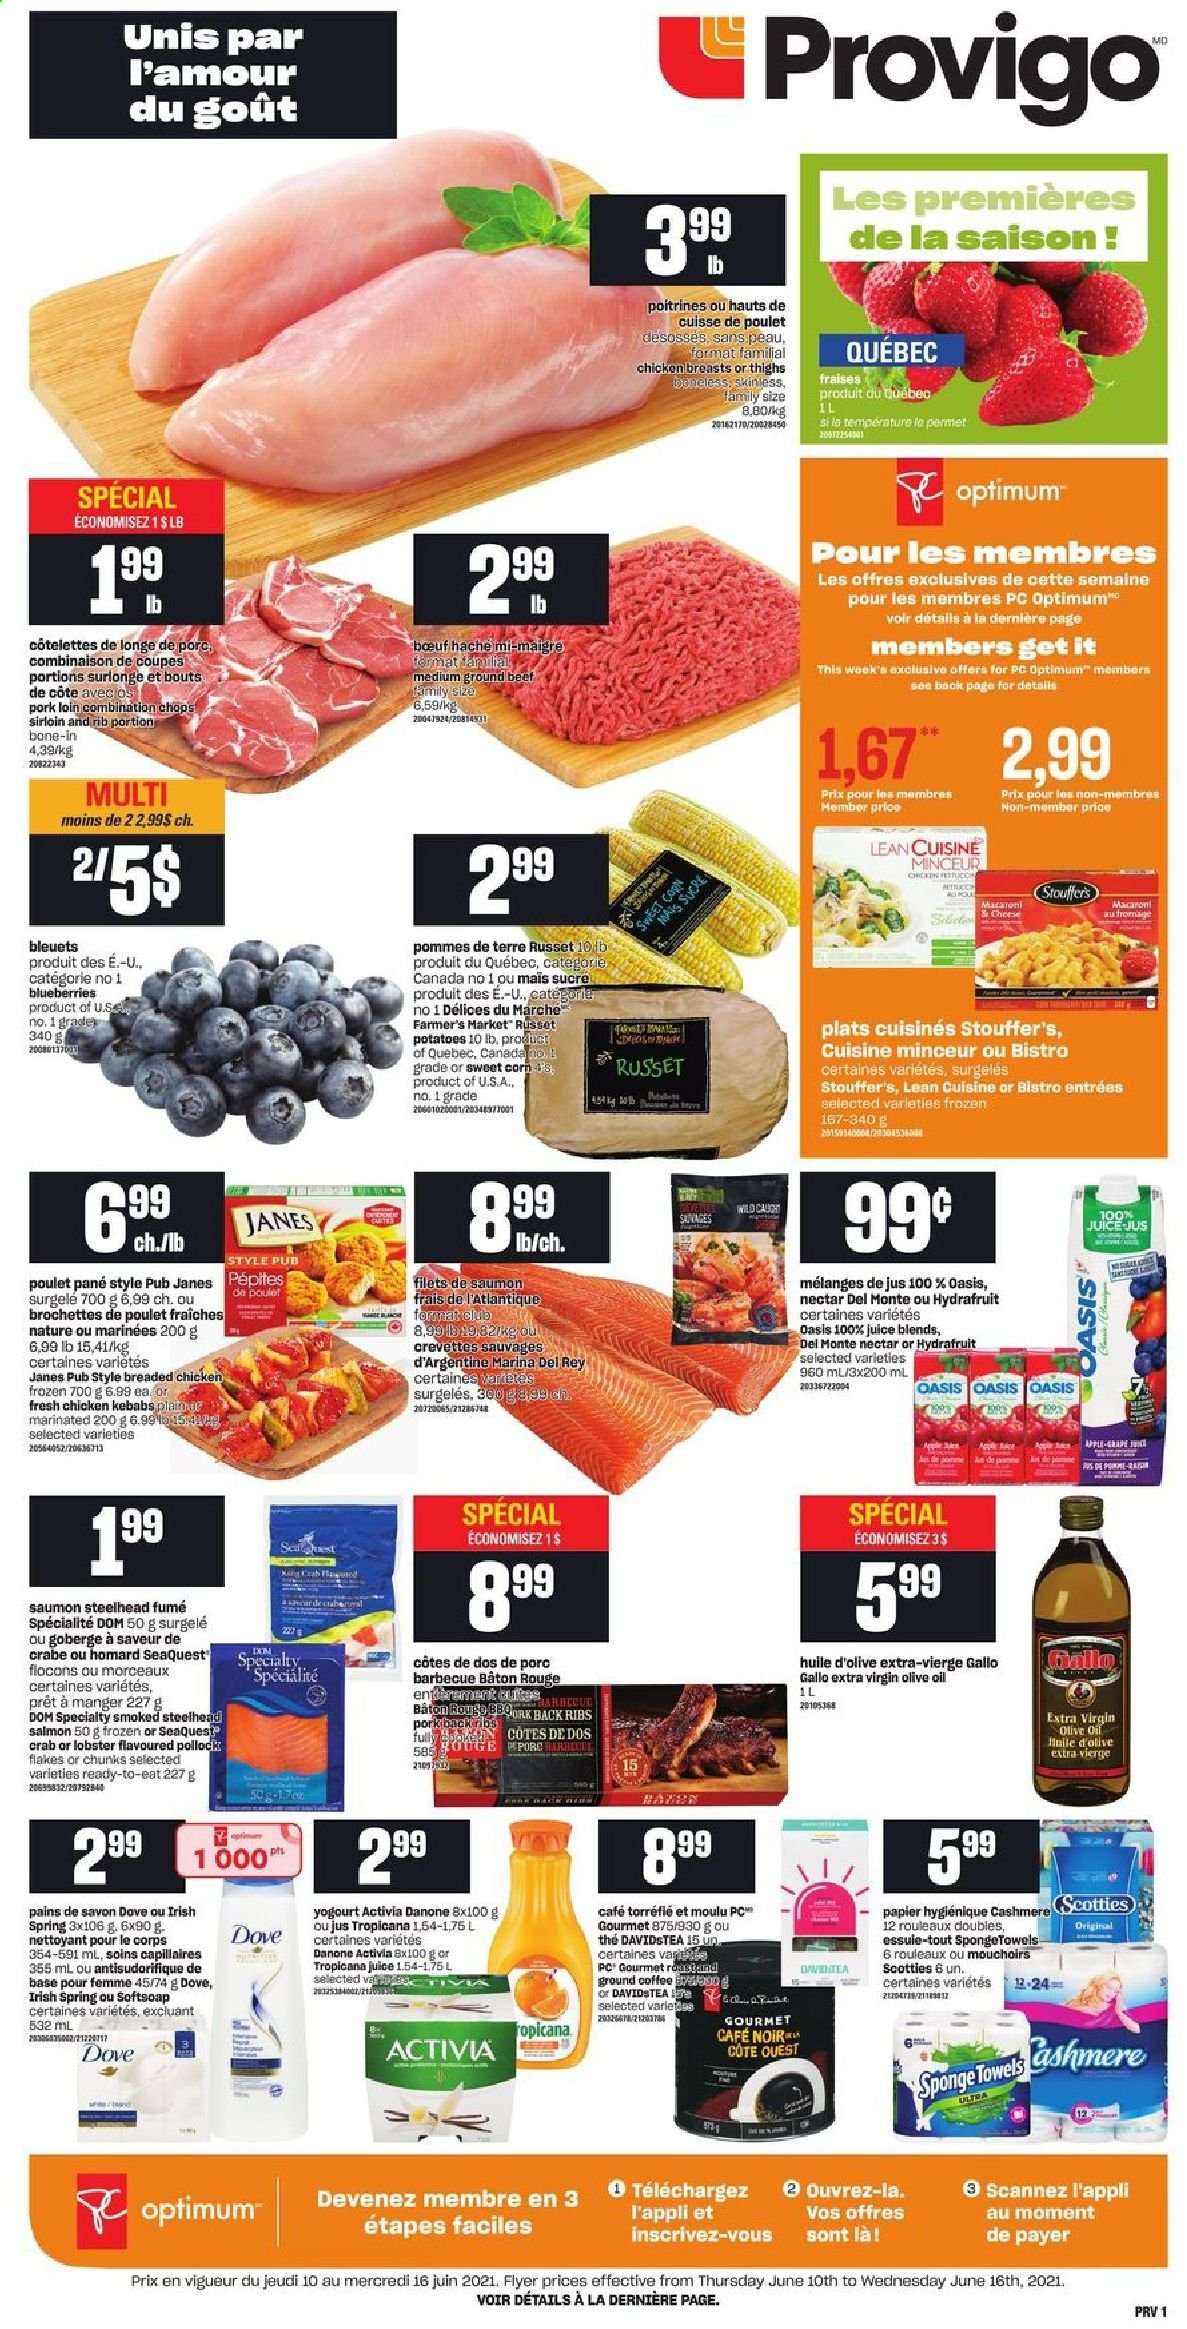 thumbnail - Provigo Flyer - June 10, 2021 - June 16, 2021 - Sales products - corn, russet potatoes, potatoes, sweet corn, blueberries, lobster, salmon, pollock, crab, macaroni, fried chicken, chicken kabobs, Lean Cuisine, Activia, Stouffer's, extra virgin olive oil, olive oil, oil, juice, coffee, ground coffee, pork loin, pork meat, Softsoap, Danone. Page 1.